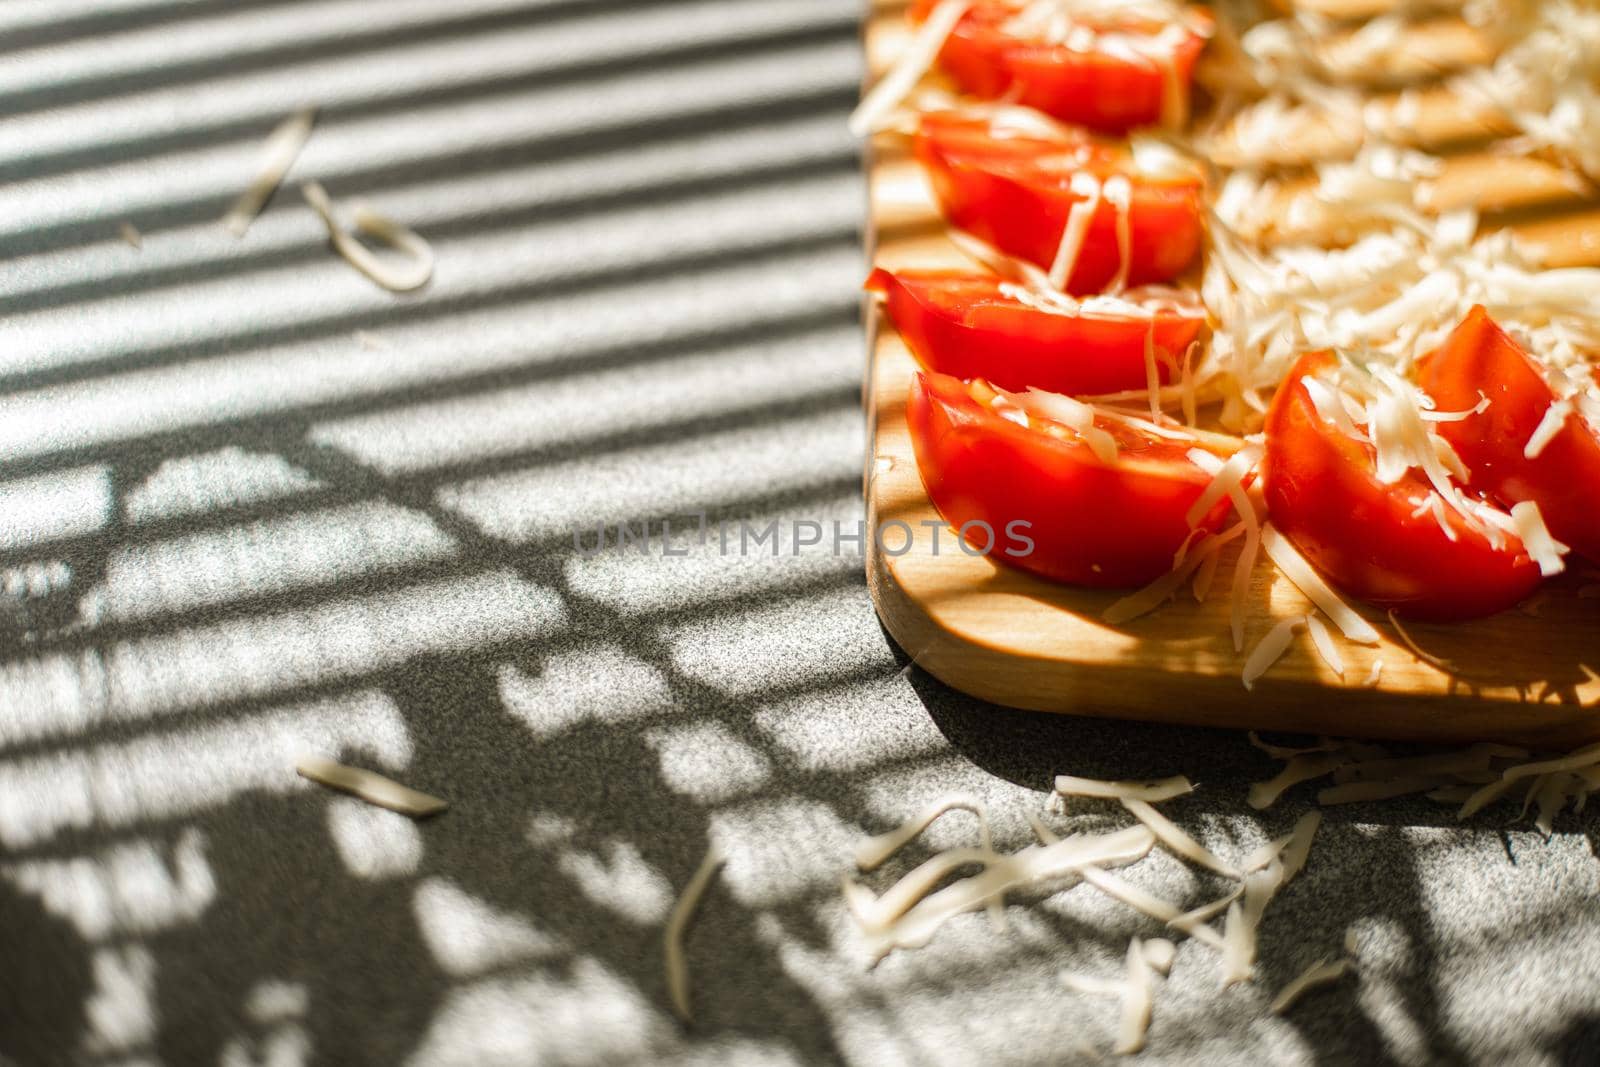 A small pile of grated fresh cheese and red tomatoes lies on a wooden board in the kitchen by StudioLucky